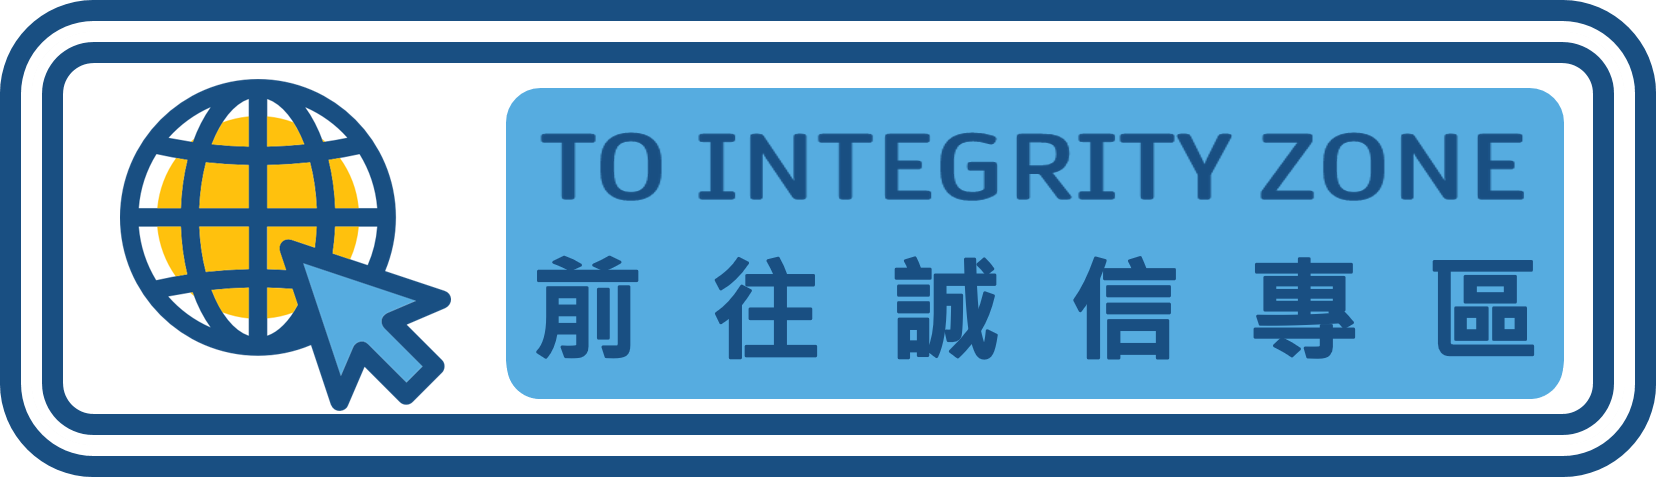 To Integrity Zone button